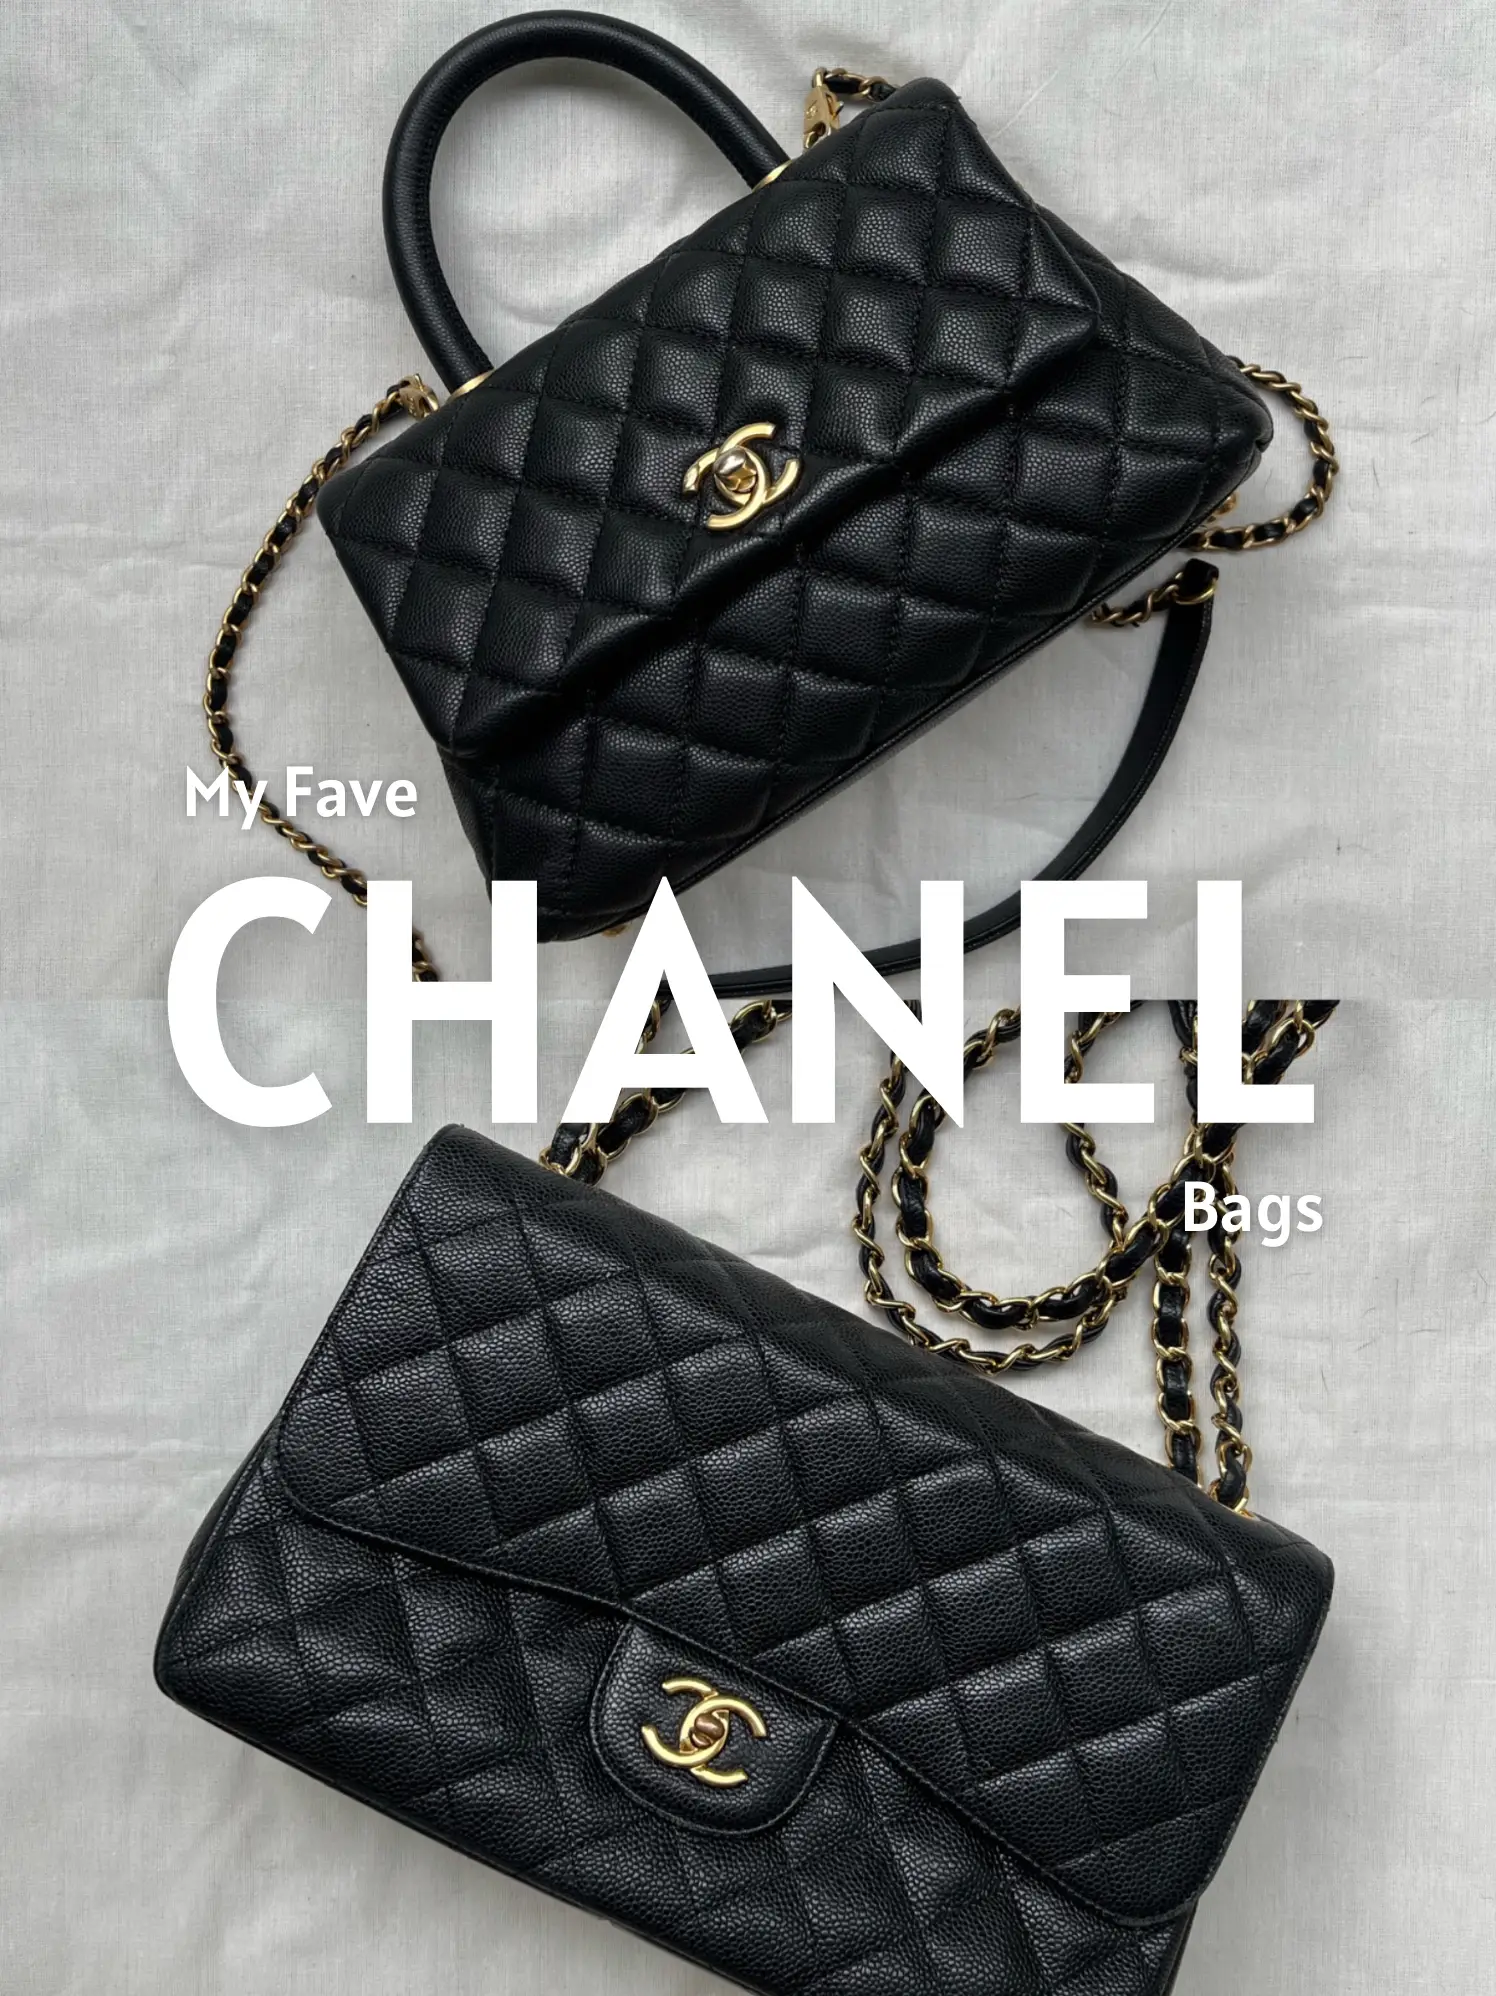 Luxe Dreams Do Come True!: Introduction: Chanel Totes